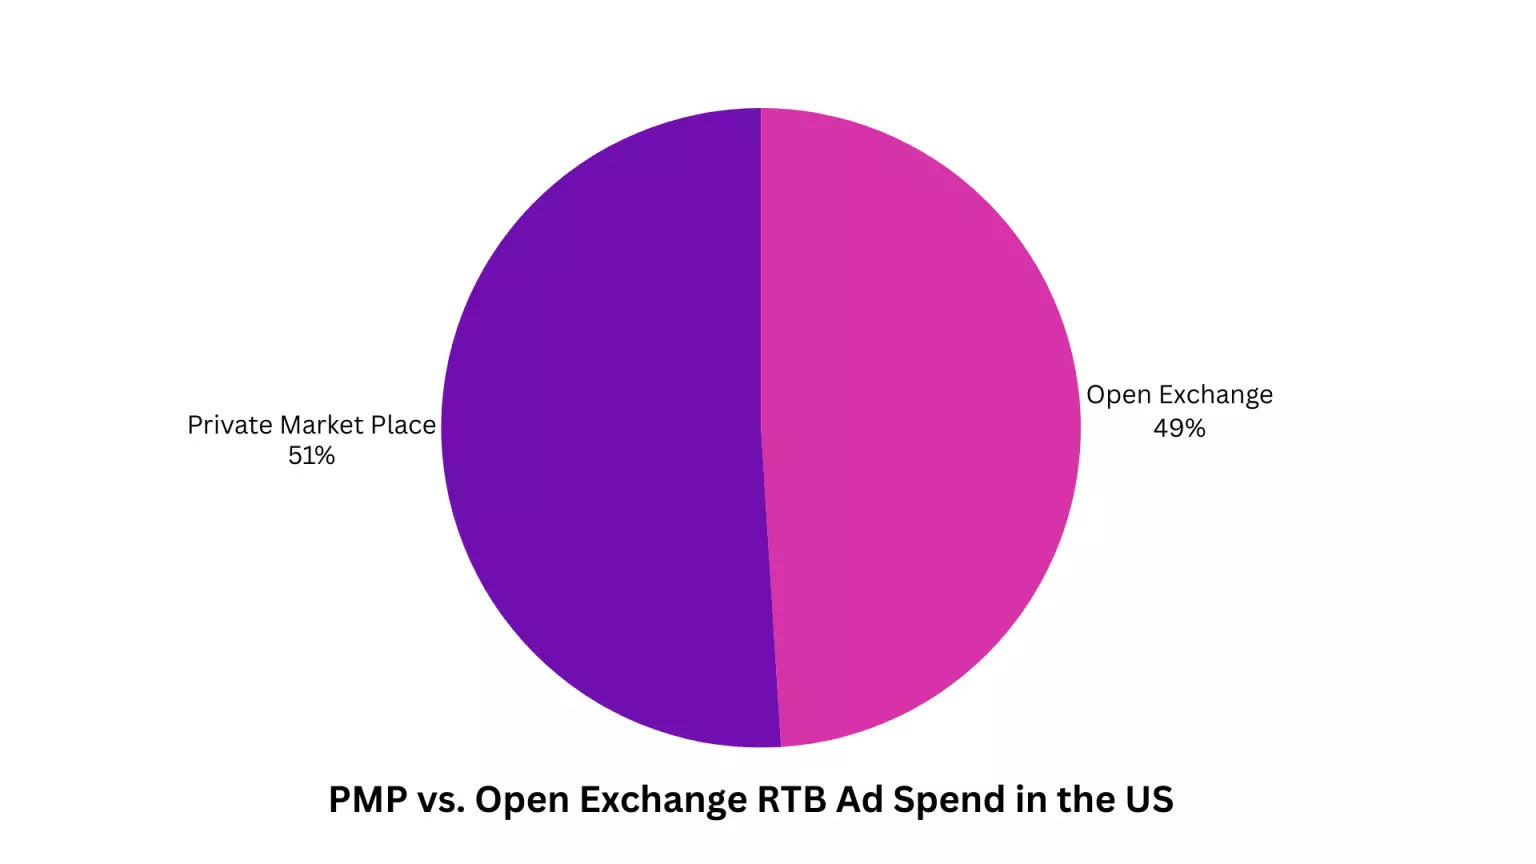 PMP vs. Open Exchange RTB Spend in the US